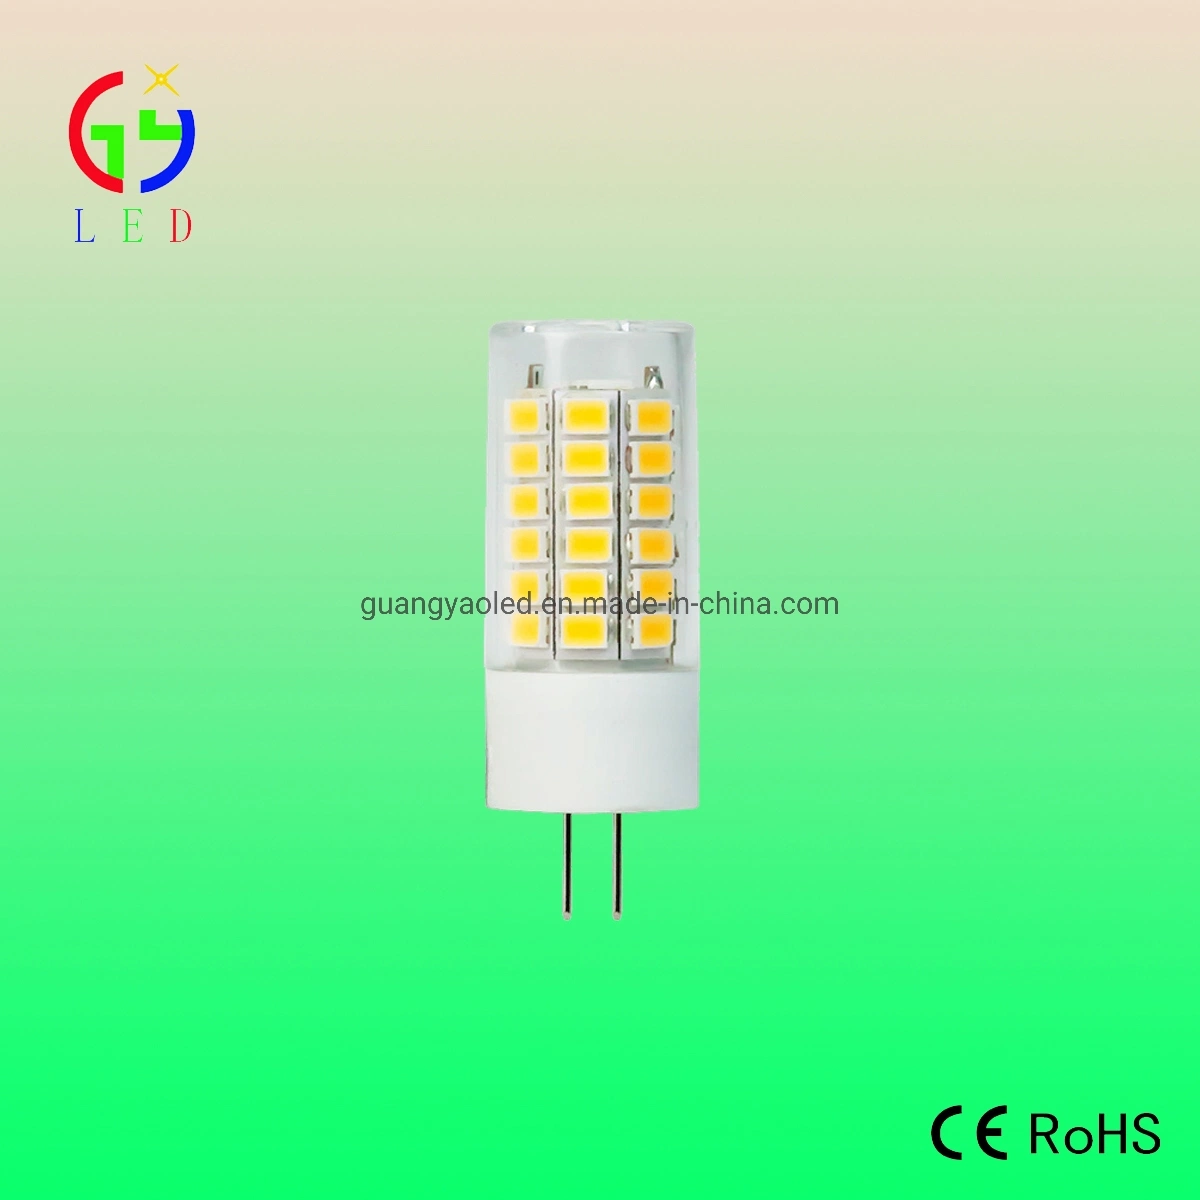 New LED G4 51SMD 2-Pins Plug Bulbs, LED Gy6.35 Lamps for Household Lighting Fixtures, LED G4 Replacement Bulbs for Coach Vehicle